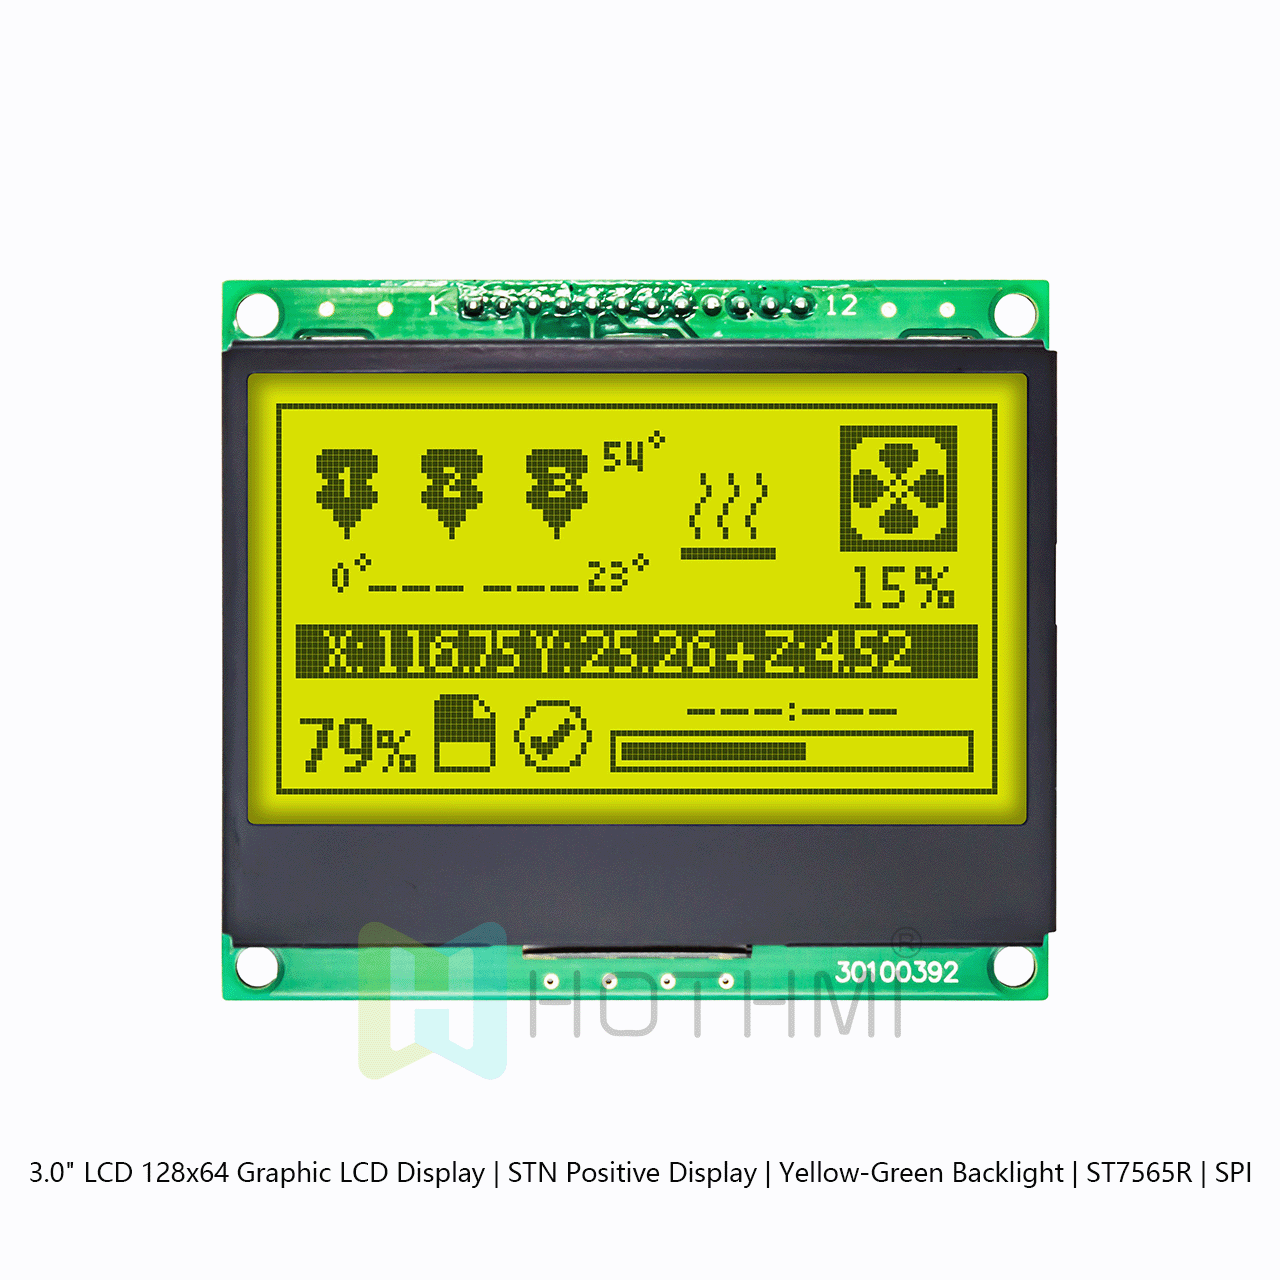 3.0" LCD 128x64 Graphic LCD Display | STN Positive Display | Yellow-Green Backlight | ST7565R | SPI arduino